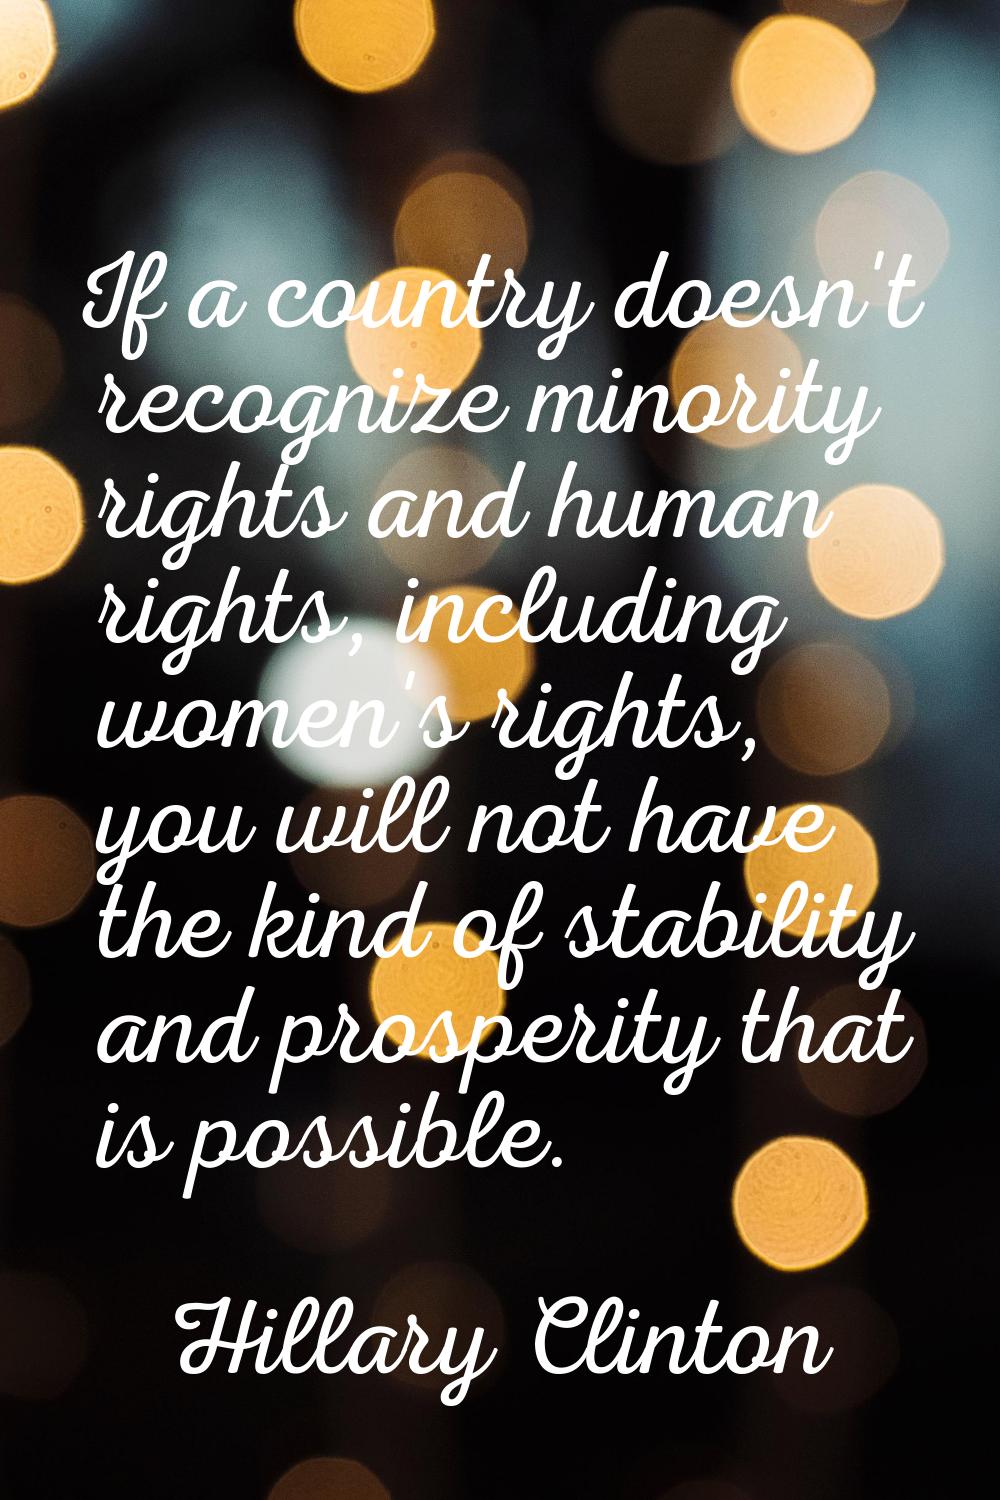 If a country doesn't recognize minority rights and human rights, including women's rights, you will